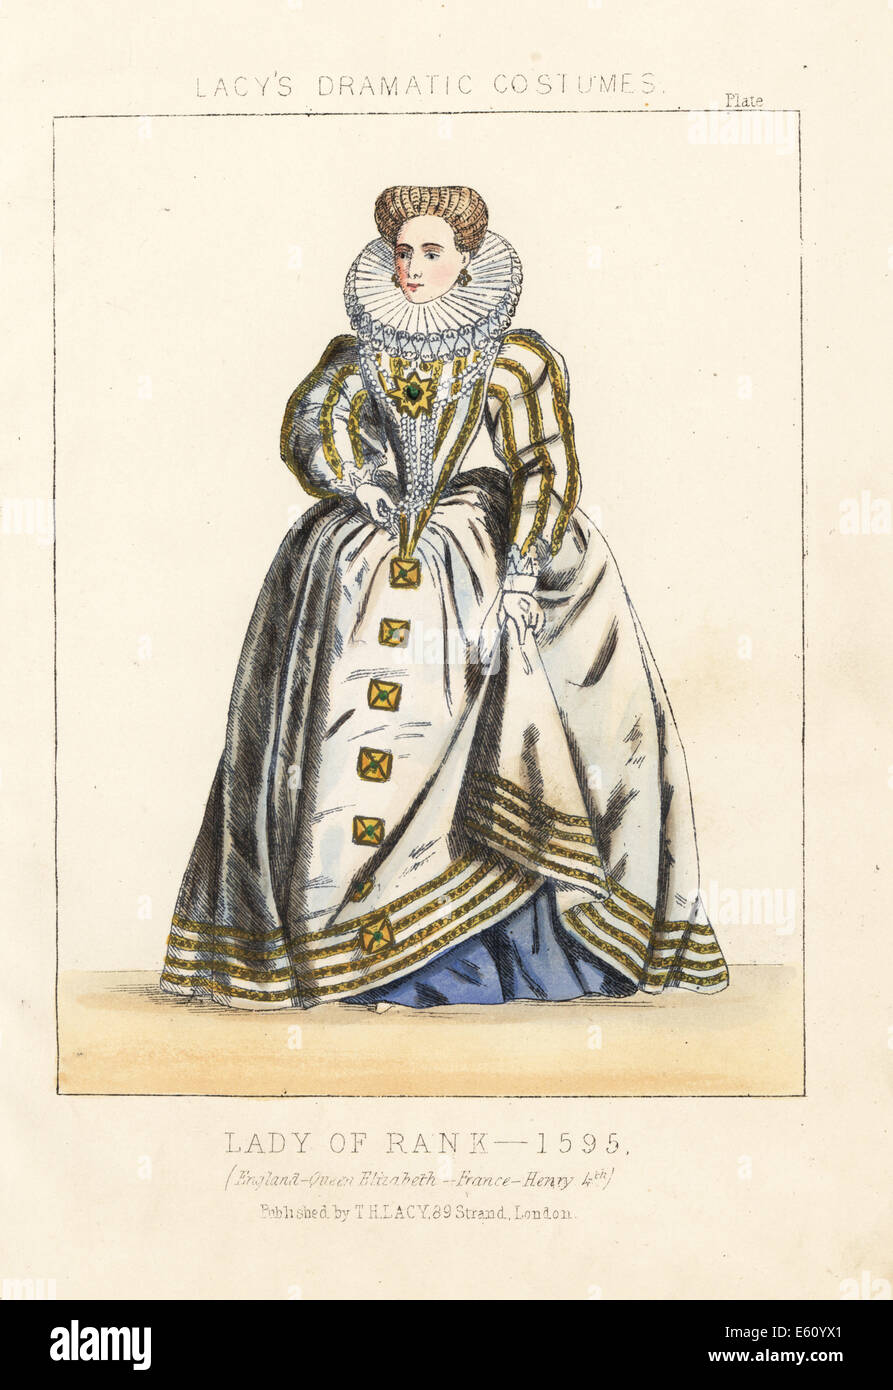 Costume of a lady of rank, reign of Queen Elizabeth, England, 1595. Stock Photo